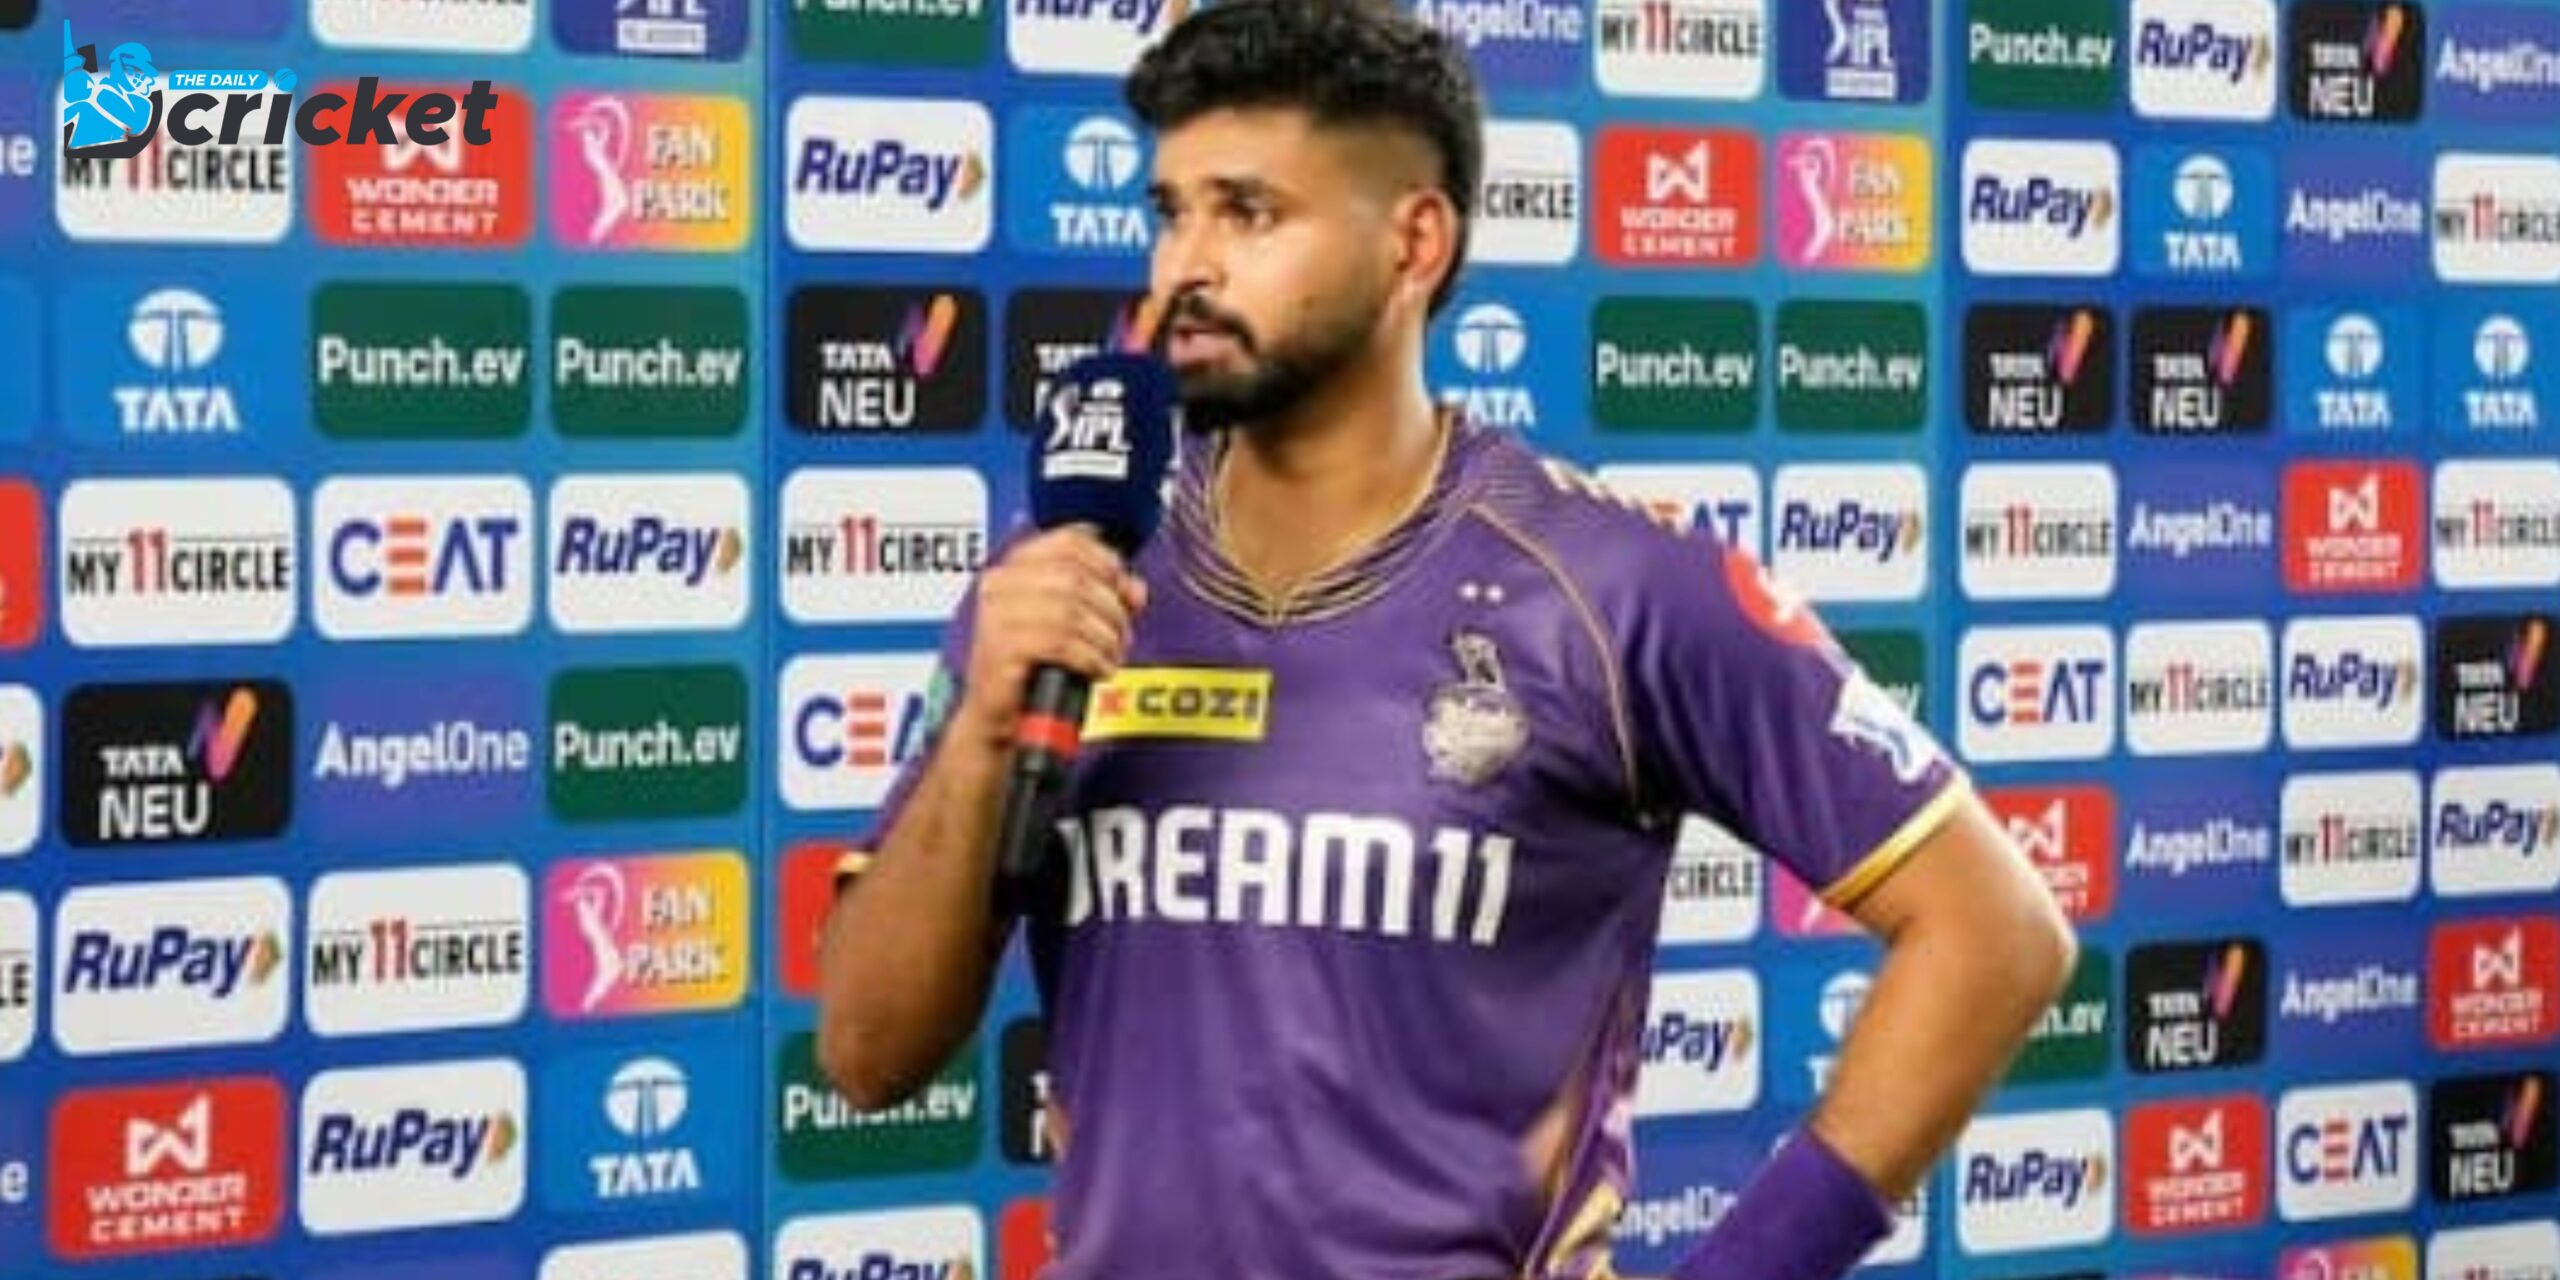 'Today Was the Day We Had to Maximise': KKR's Shreyas Iyer All Praise for Dominant Performance in Qualifier 1 vs SRH